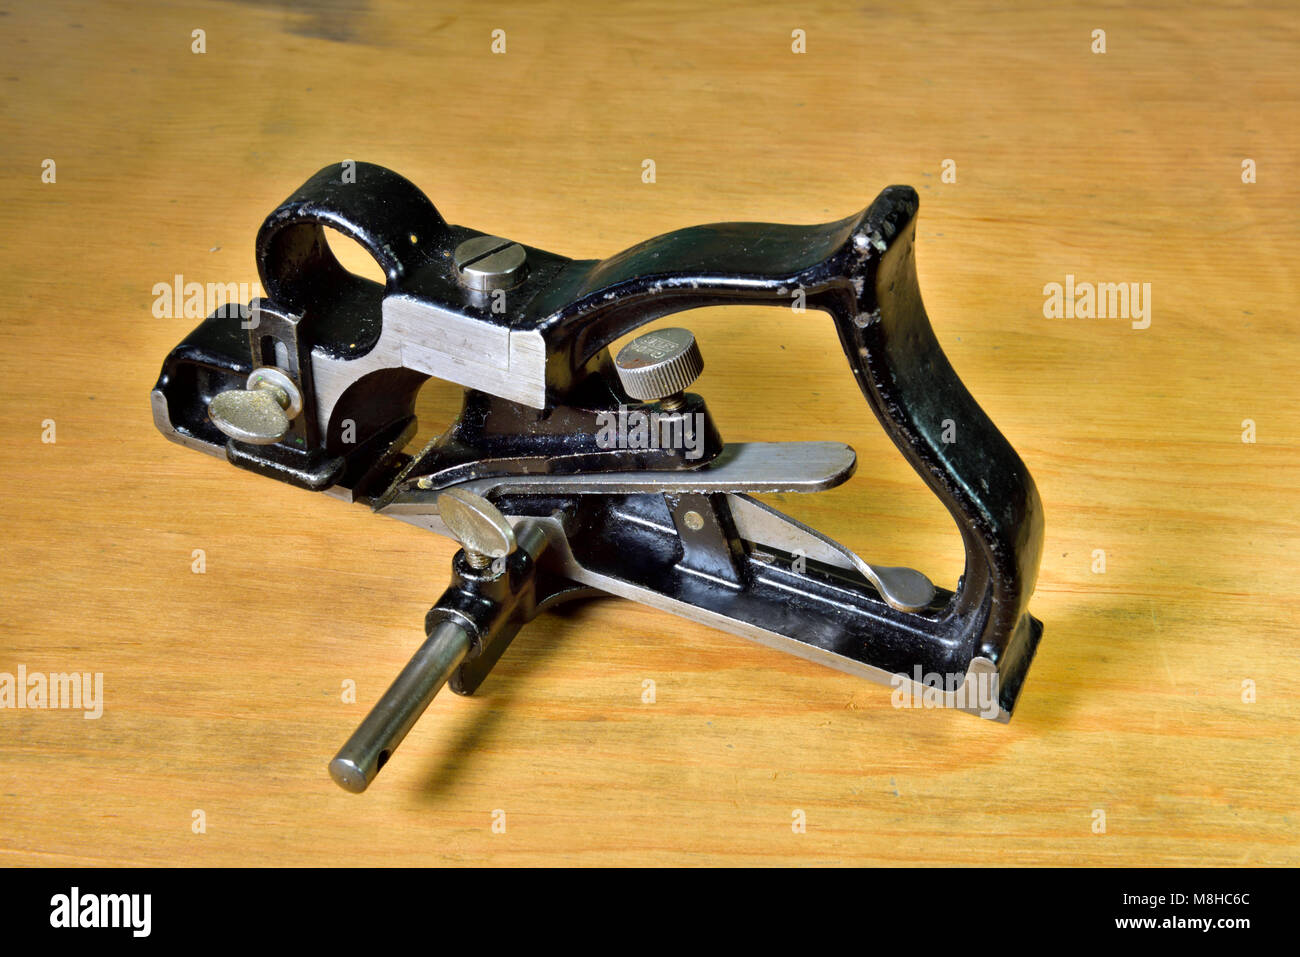 Stanley 278 rabbet and fillitster woodworking plane, made from 1915 to 1943 Stock Photo